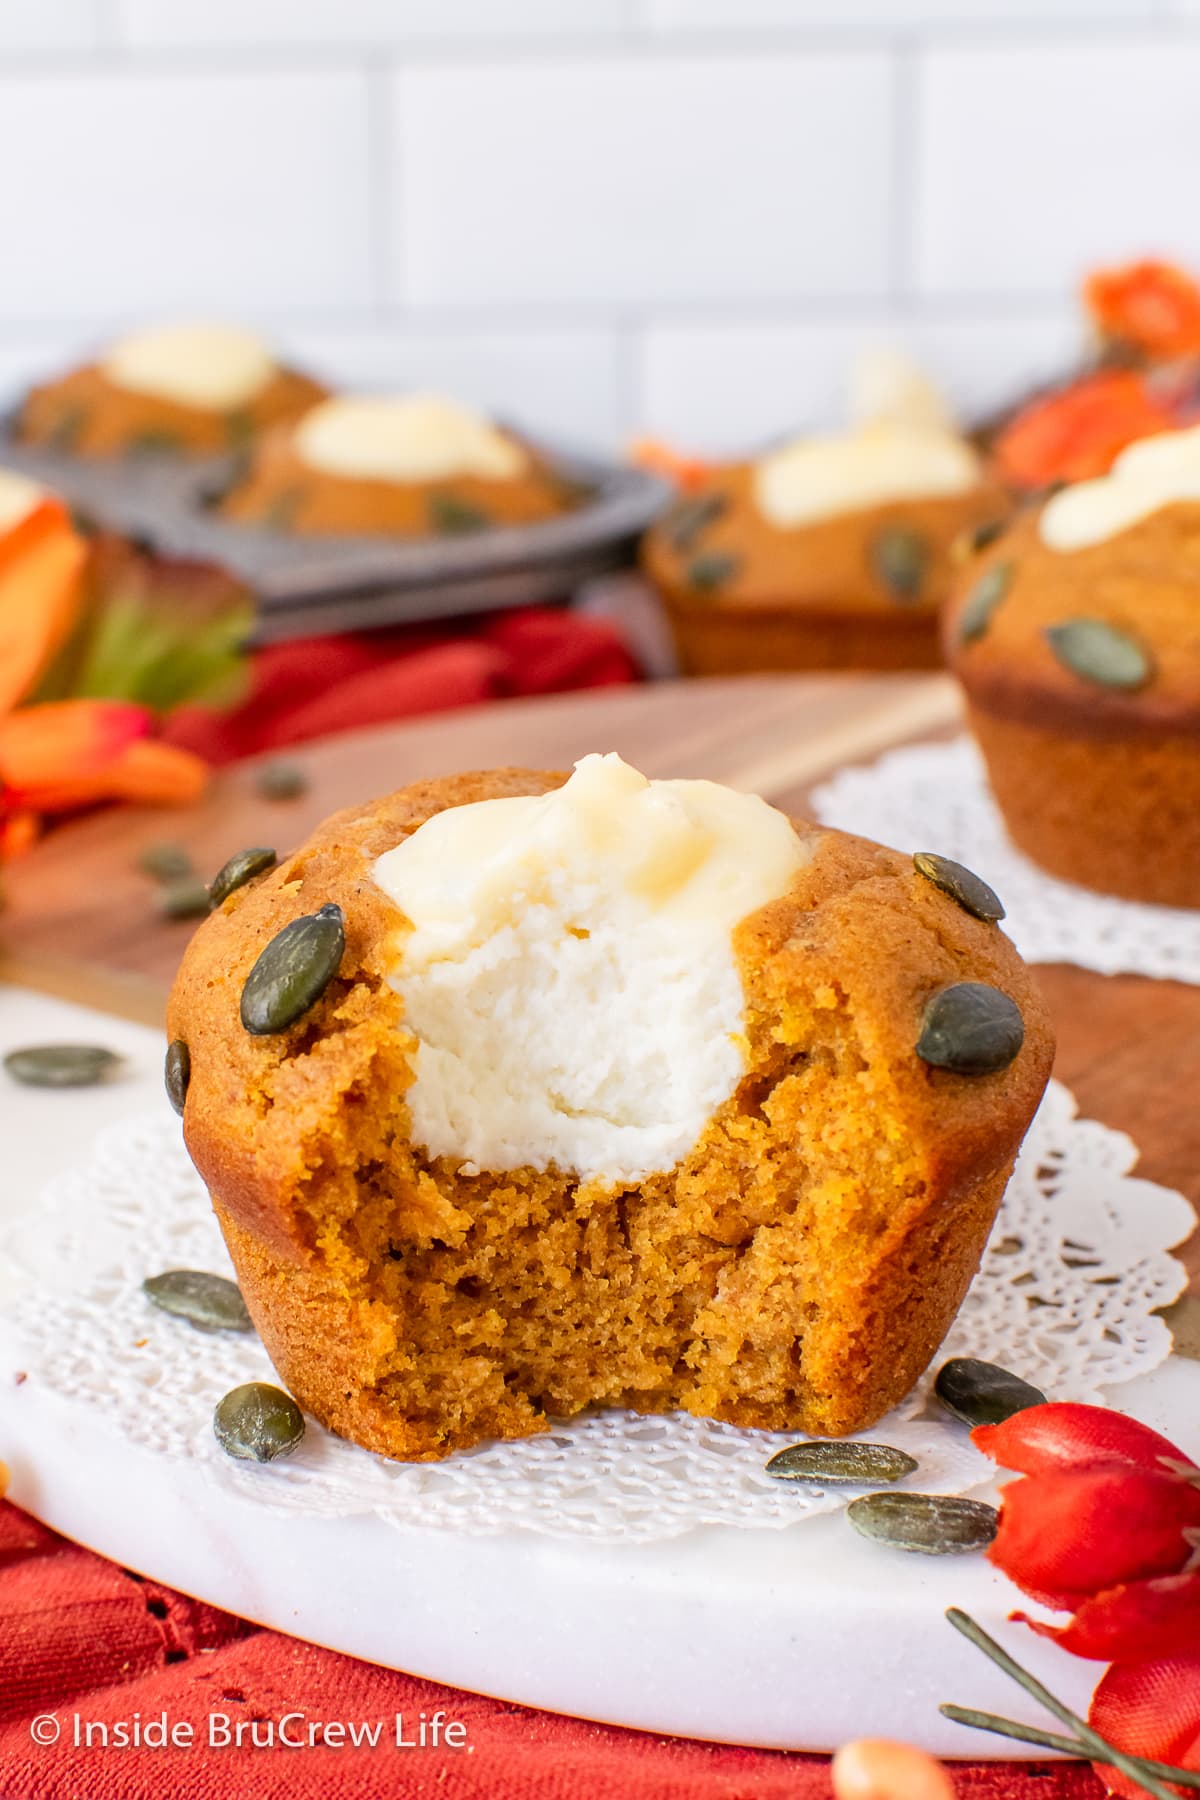 A pumpkin muffin with a bite out of it showing the cheesecake filling.